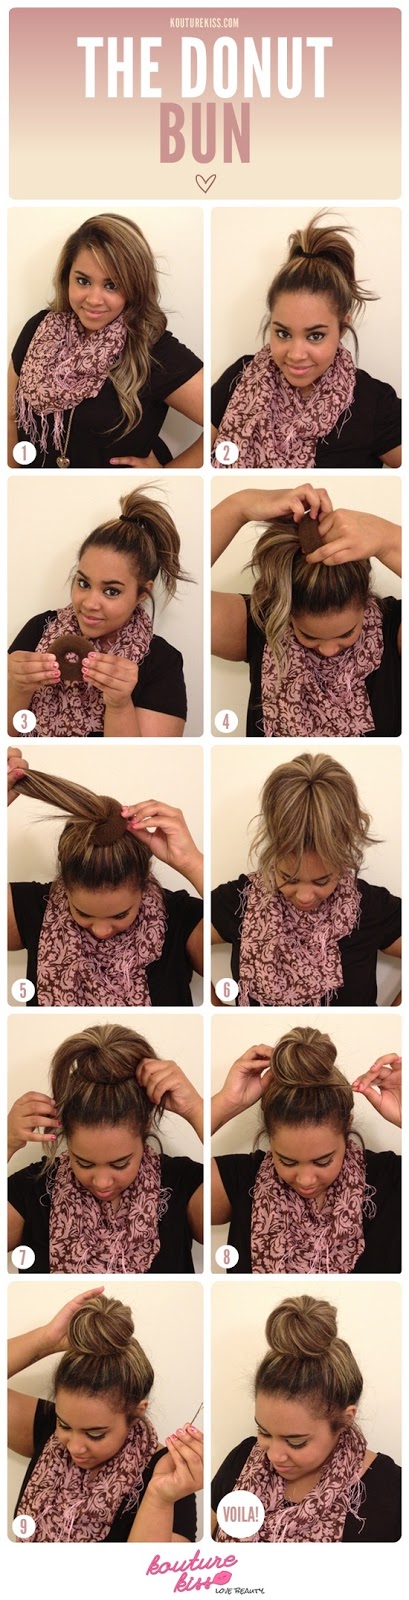 How To Use A Donut Bun Maker With Long Hair : Donut Bun Maker, Teenitor Hair Bun Maker Ring Style Bun ...